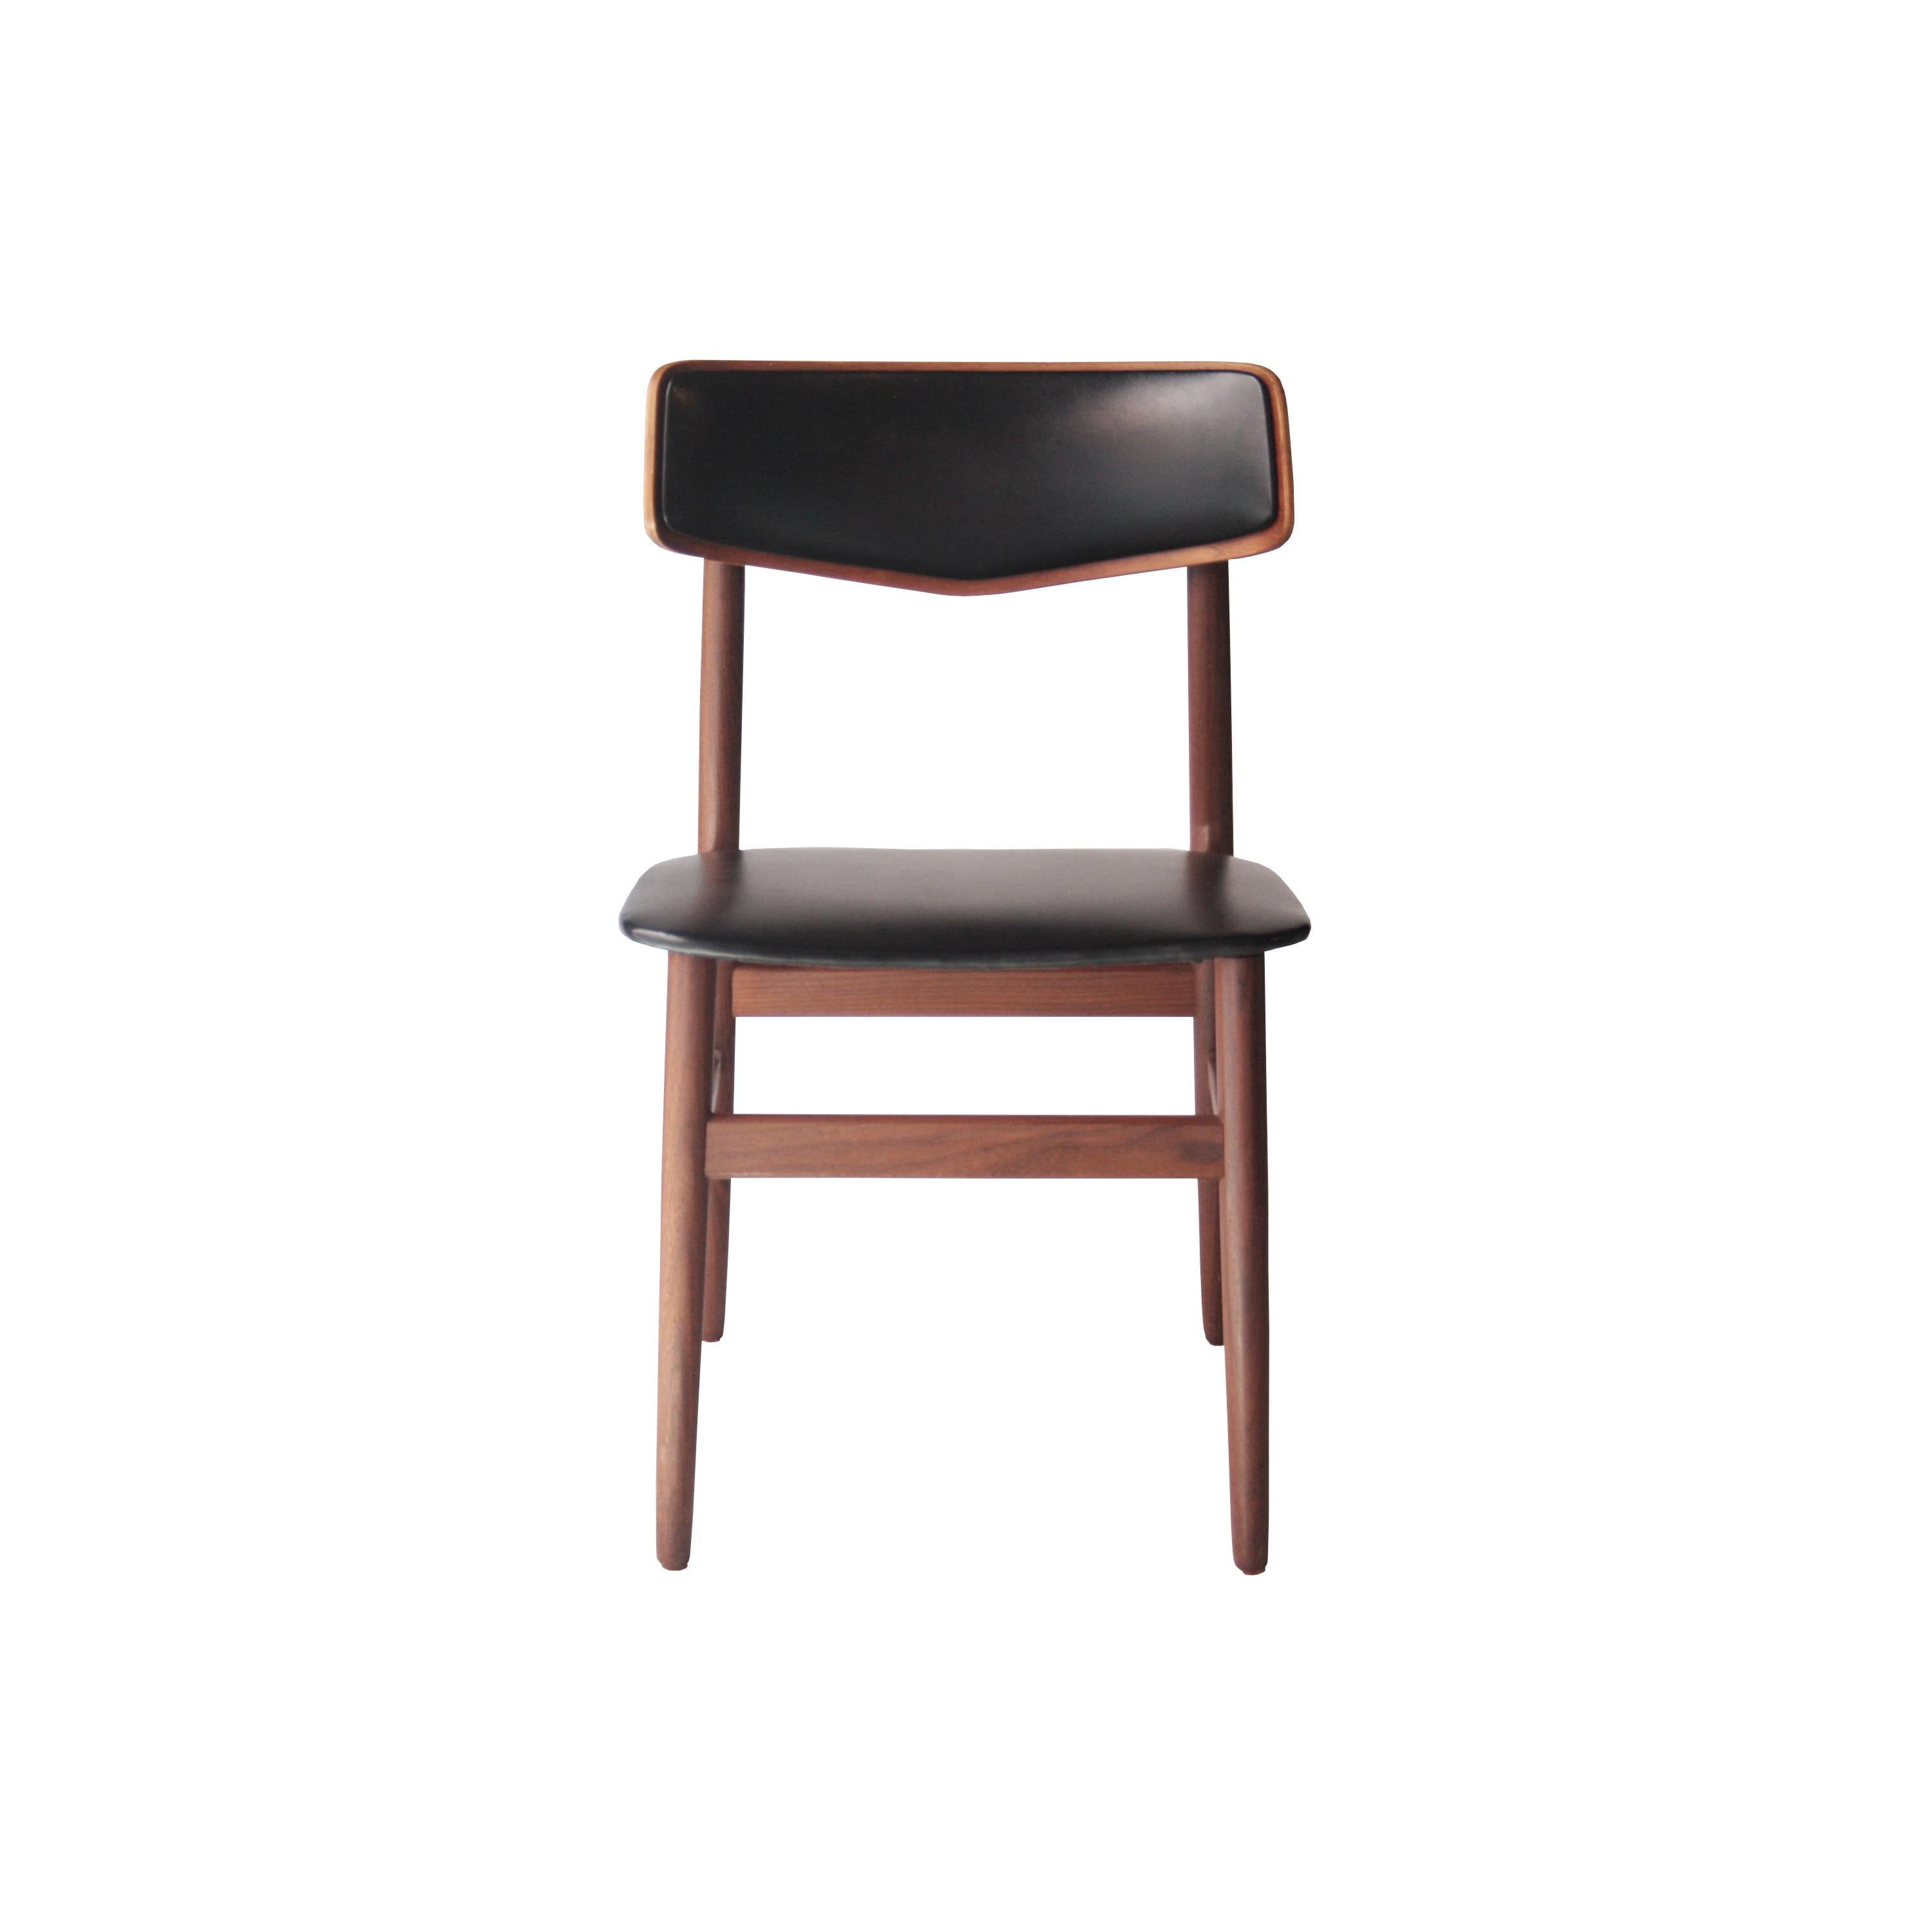 Set of six chairs with solid structure of rosewood with seat and backrest upholstered in black vinyl leather.